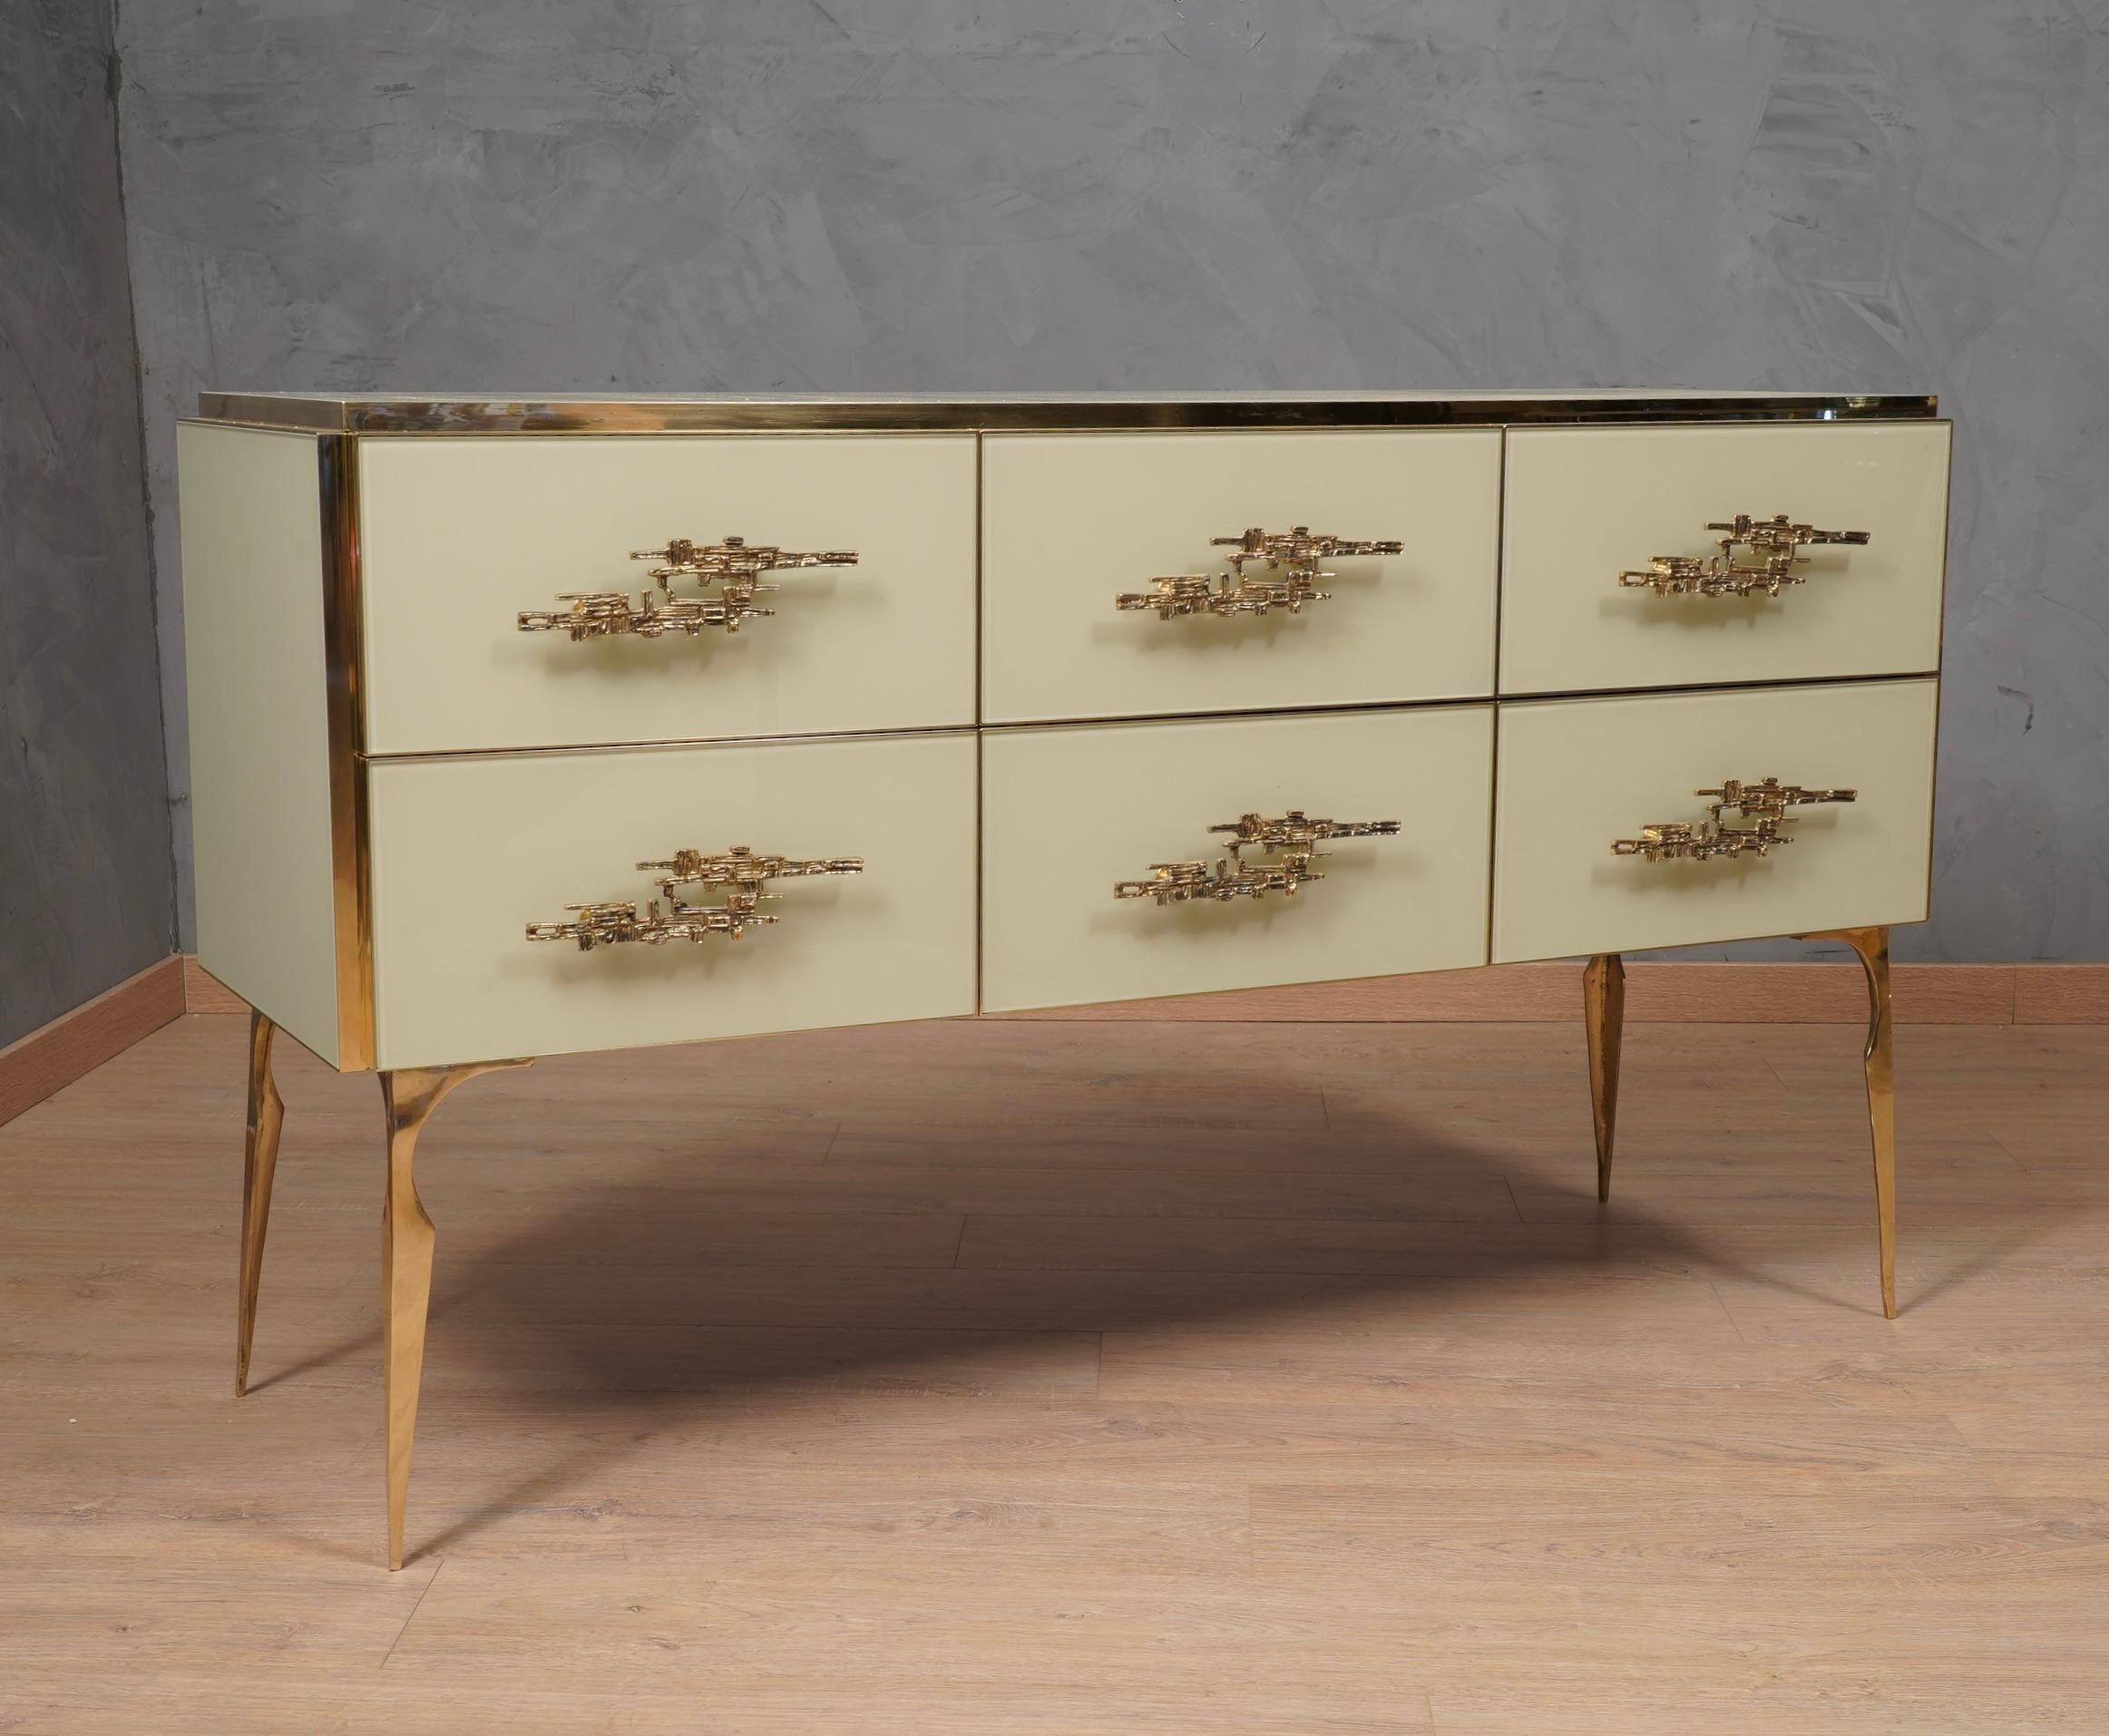 Very elegant Italian chest of drawers covered entirely in glass and brass, features its legs in a micro fusions of brass, very precious workmanship.

The chest of drawers is composed of a well-designed wooden structure with three upper and three